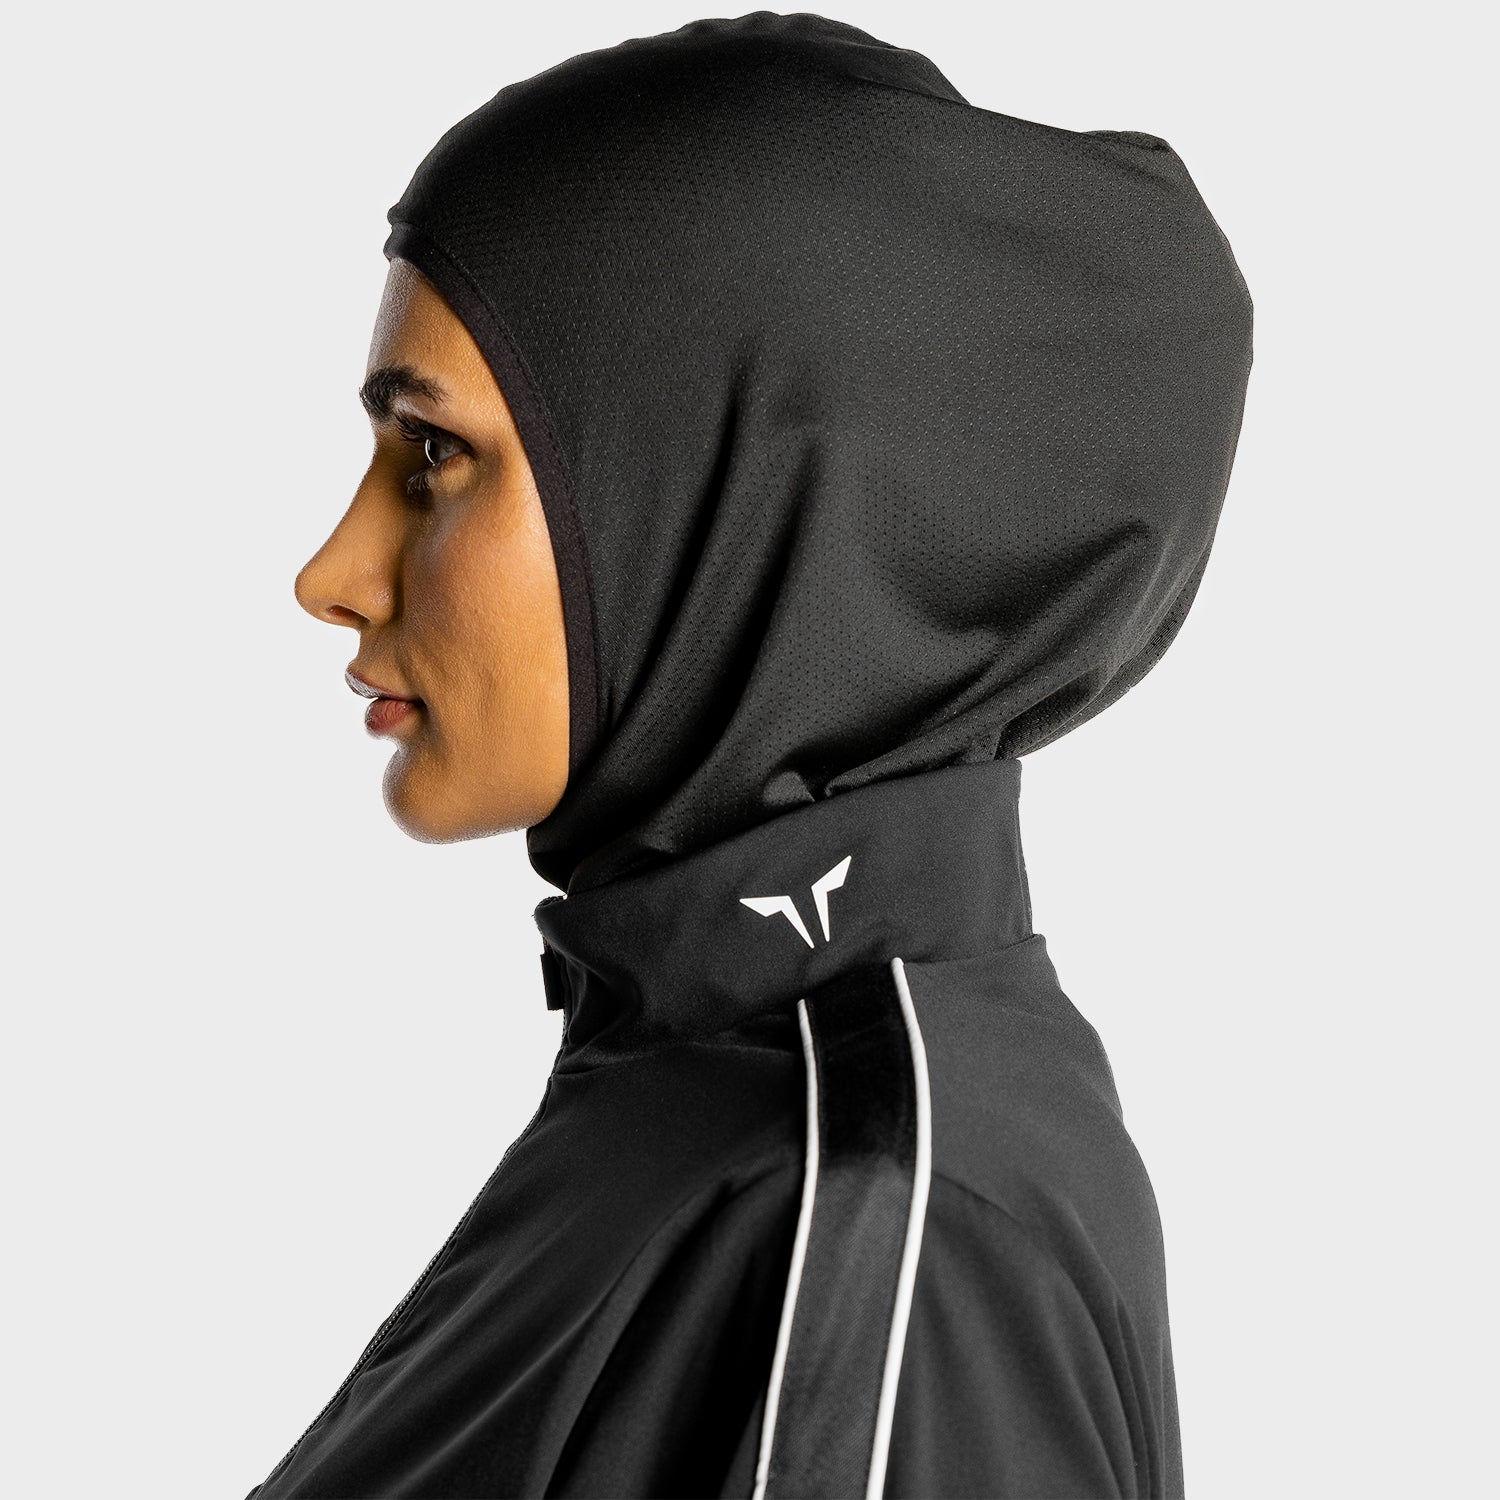 squatwolf-gym-hijab-for-women-noor-hijab-black-workout-clothes